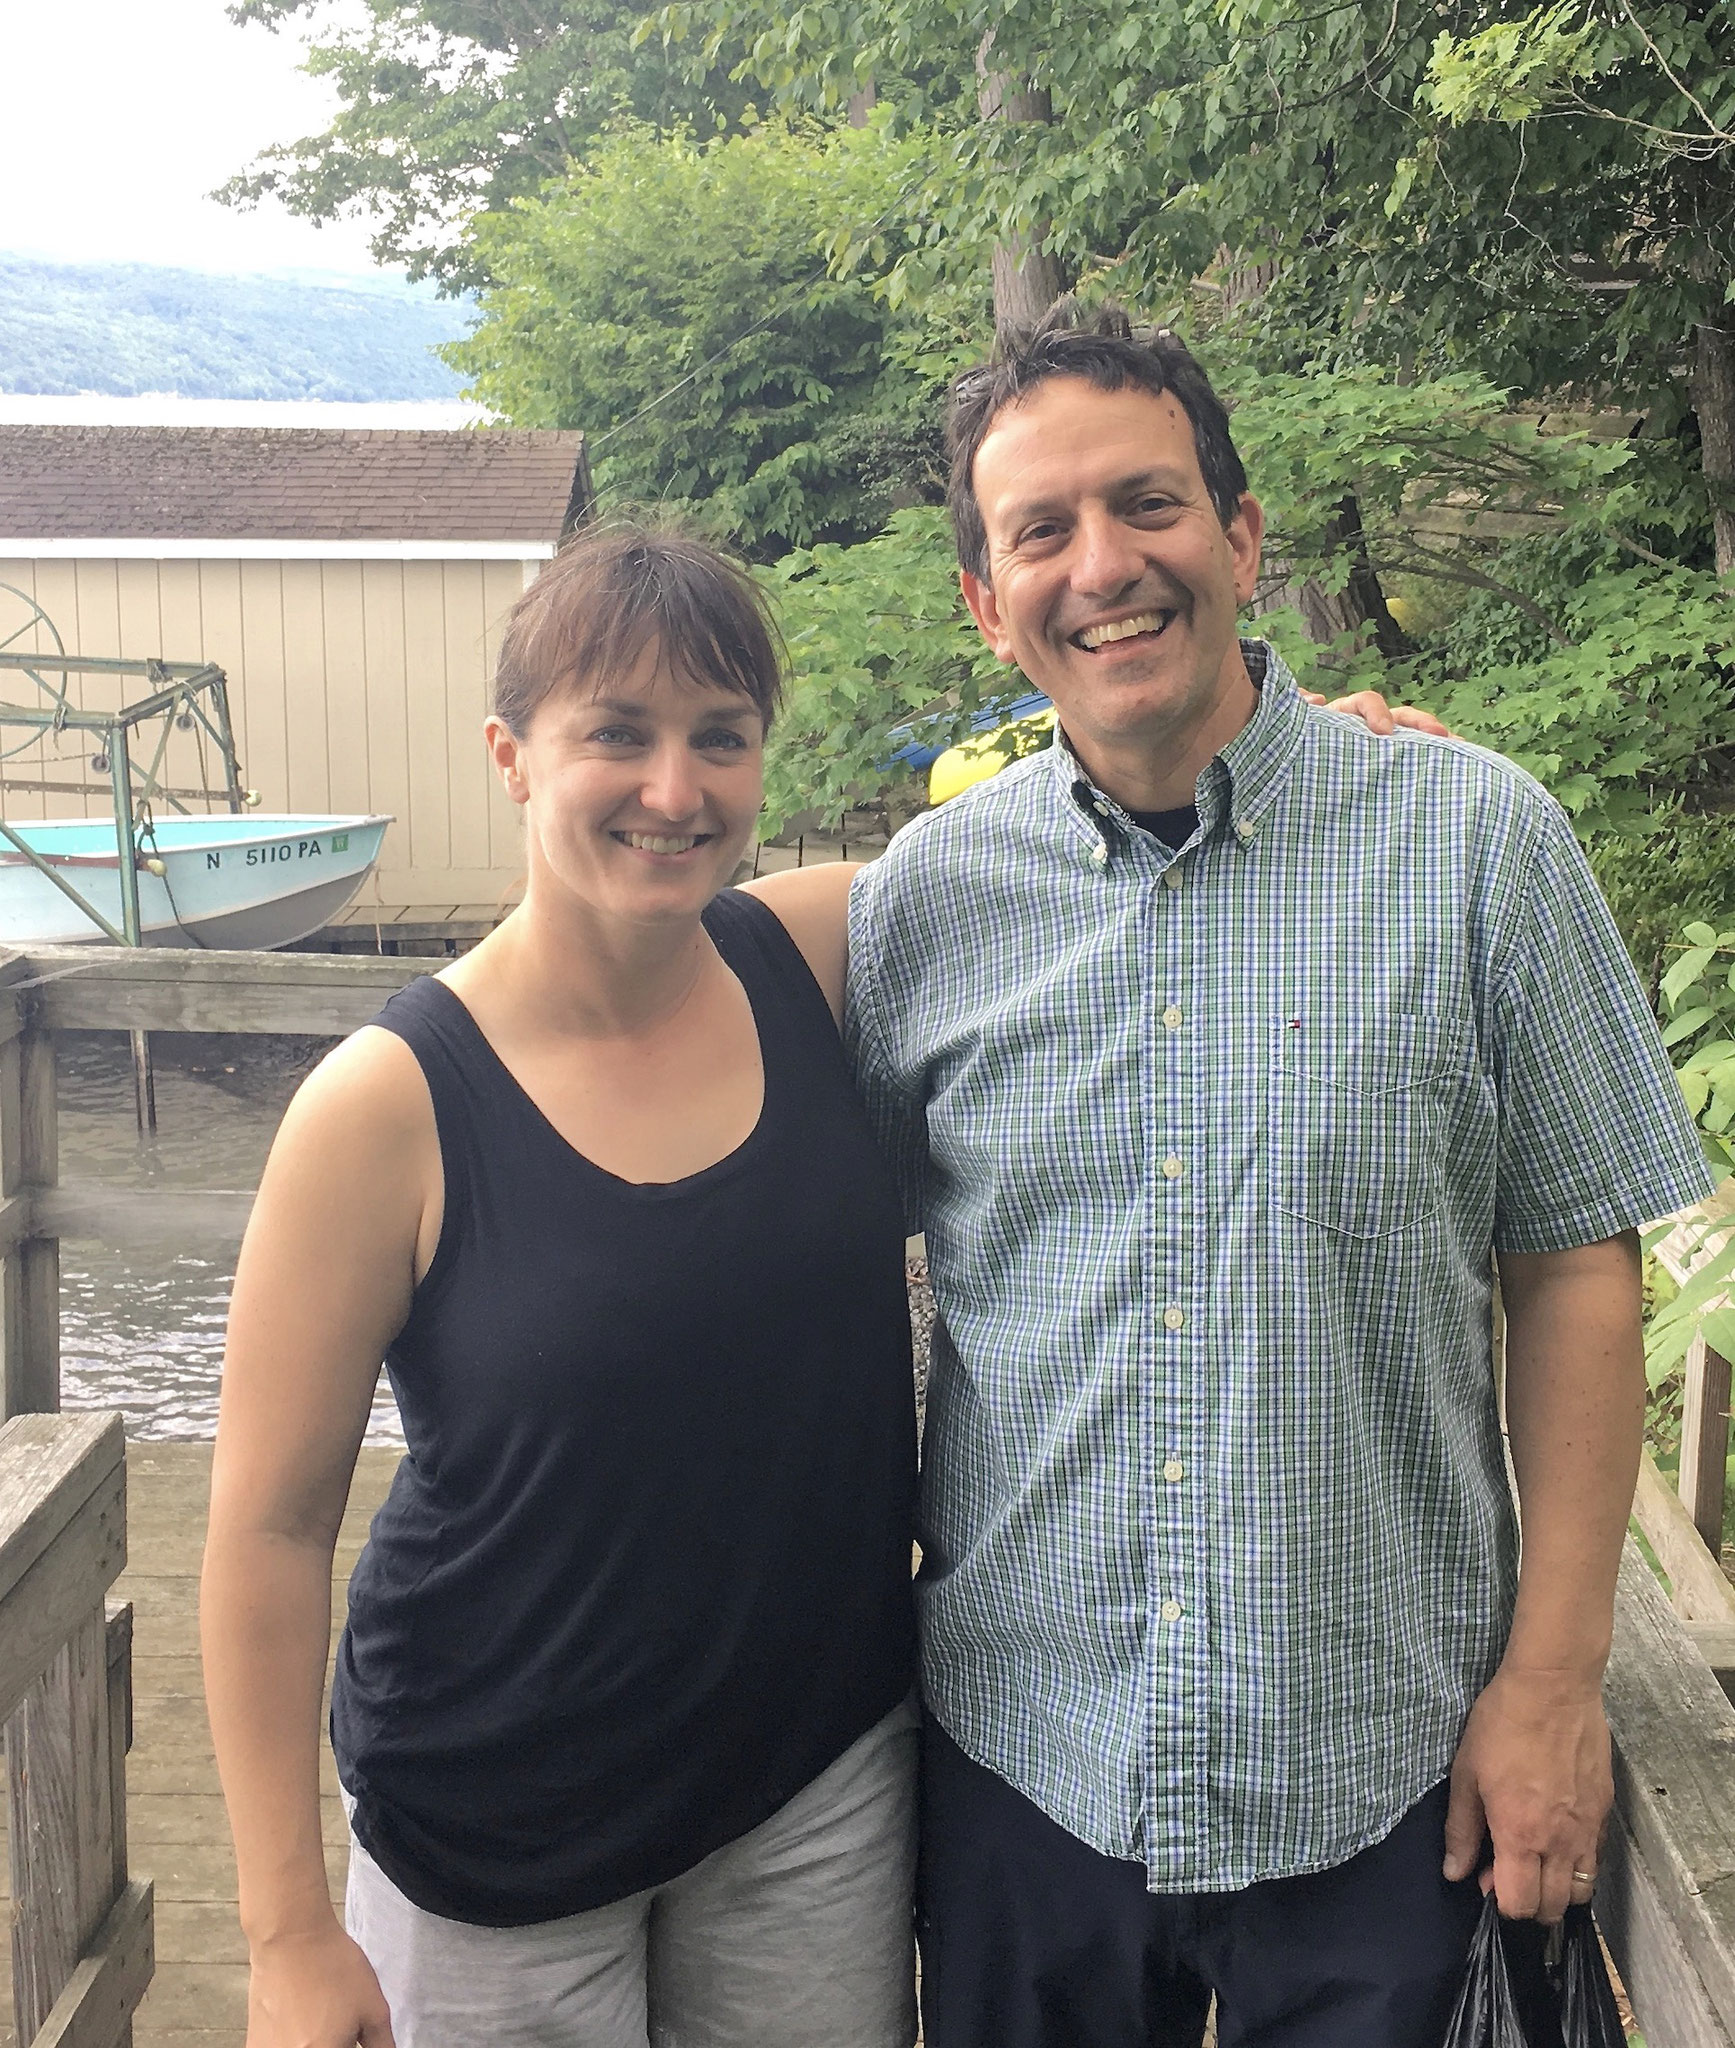 Wendy Barner & Nick Signorelli, two architects! July, 2018